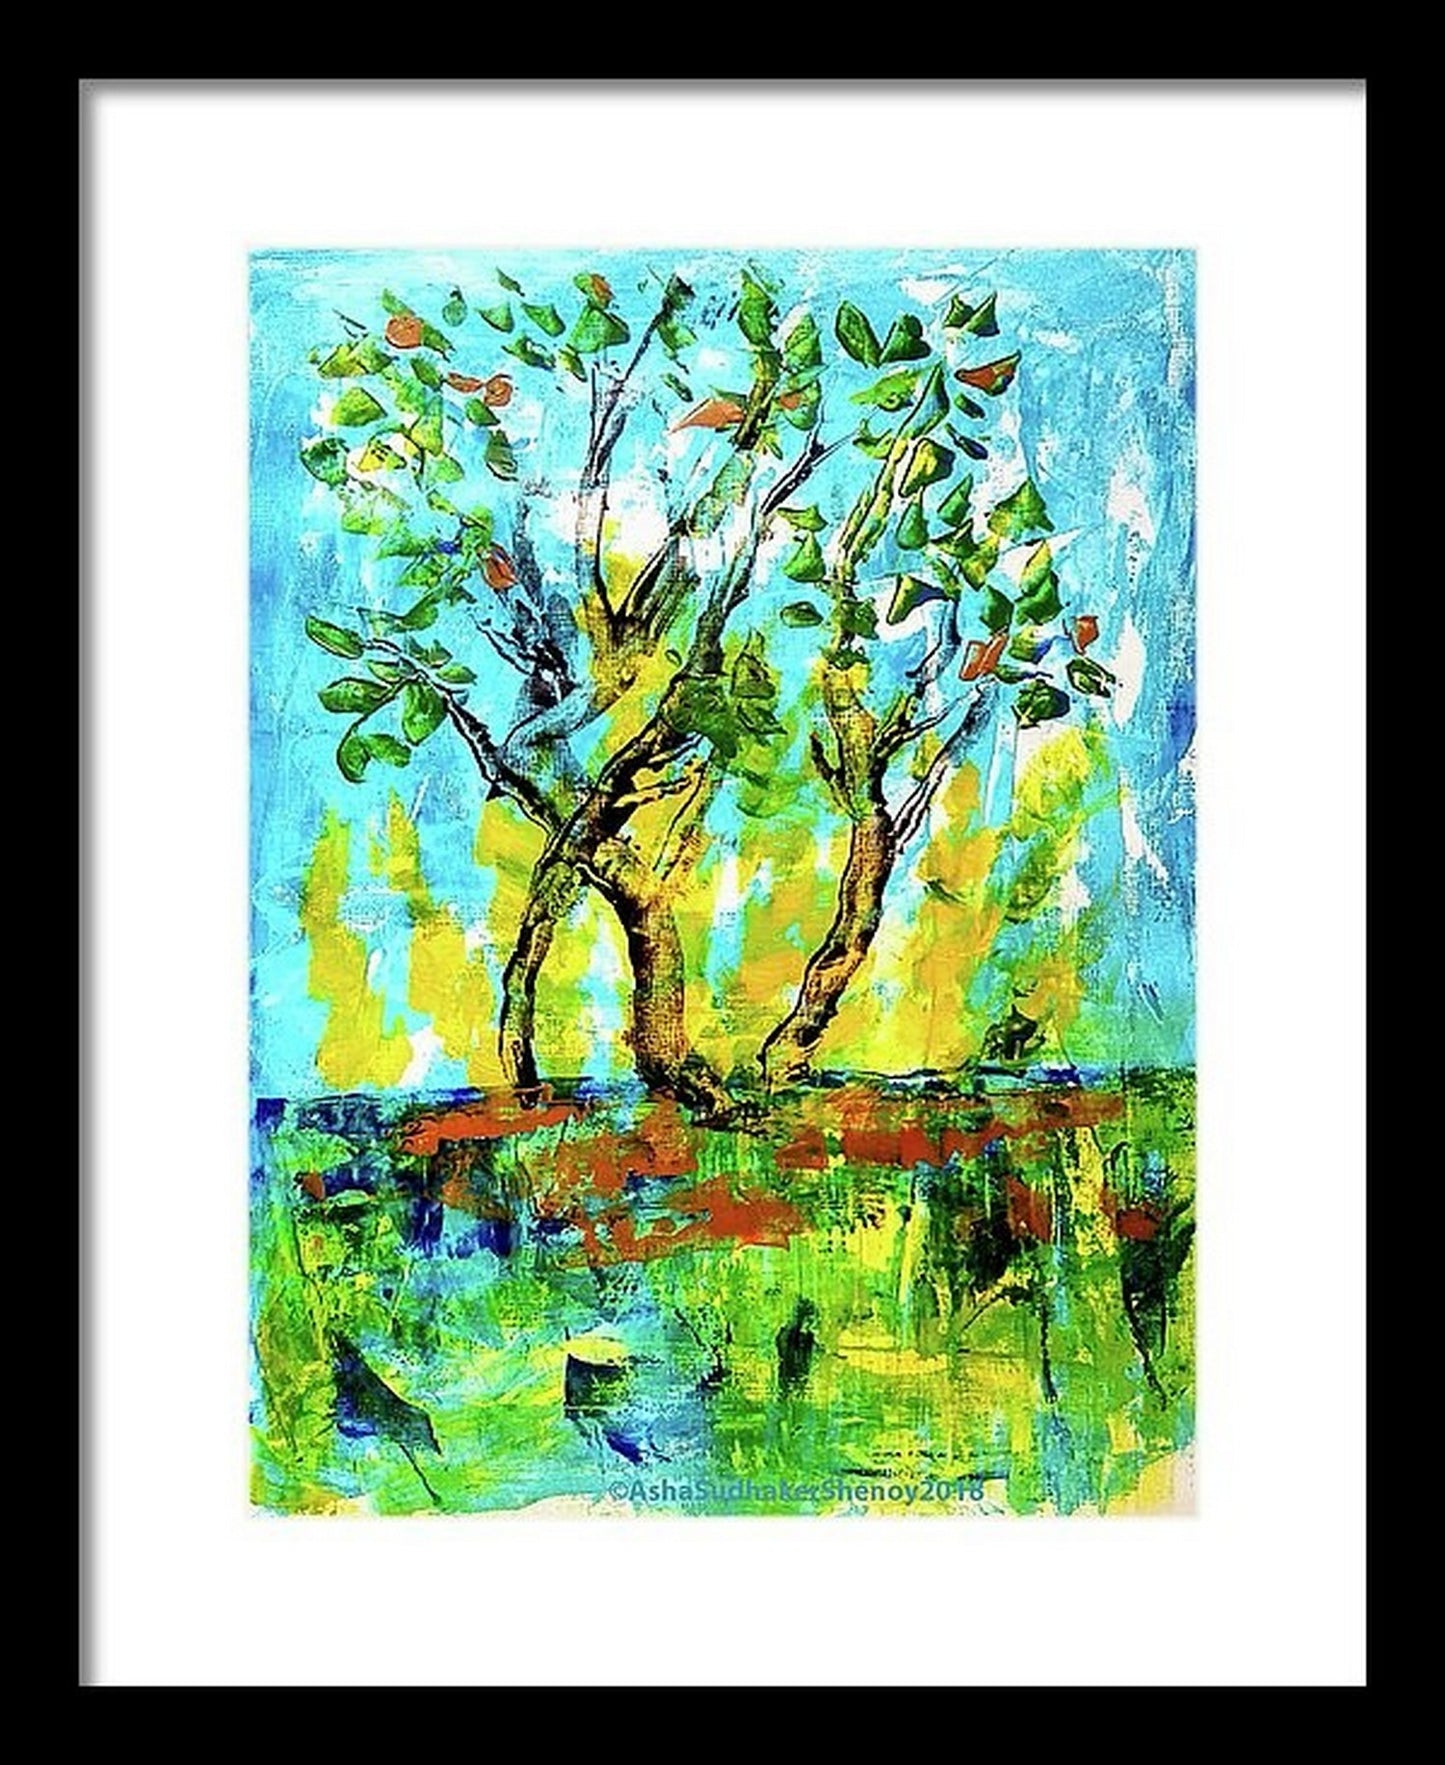 Virtual framed view The Tree, an abstract painting